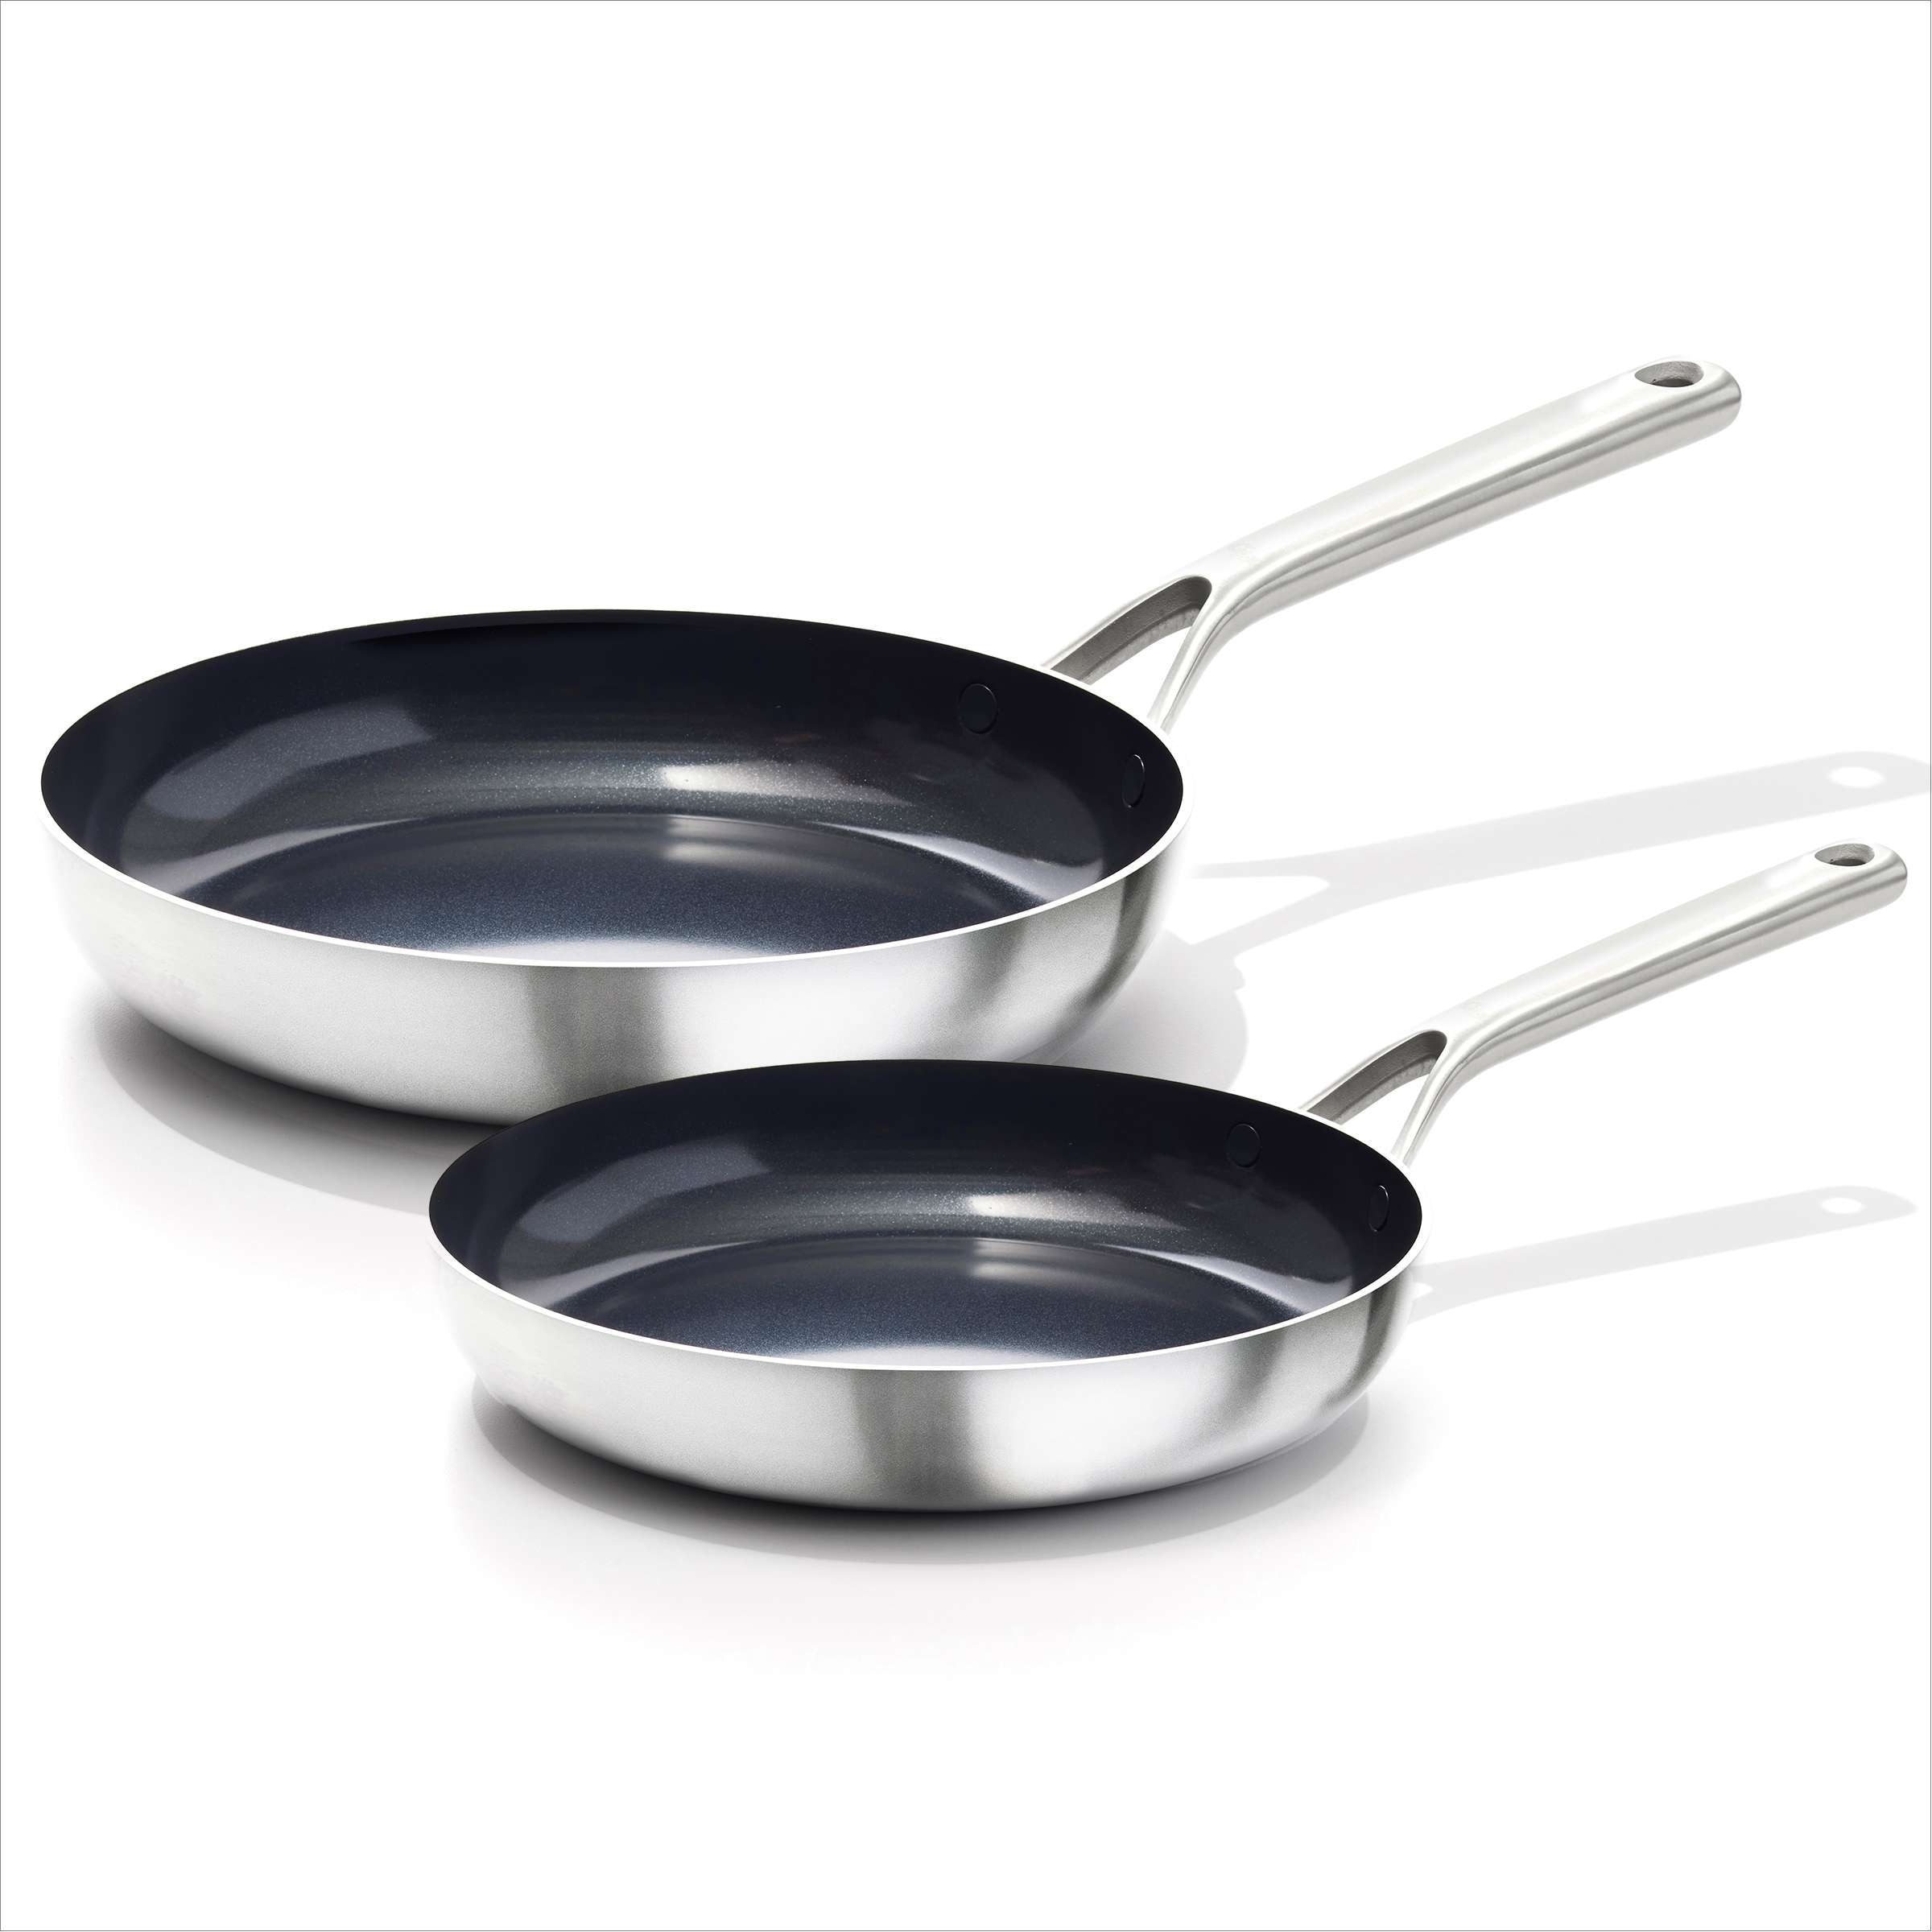 https://ak1.ostkcdn.com/images/products/is/images/direct/dc7e23fae0cbb79bc99e2475c9e019de6ed91e5c/OXO-Mira-3-Ply-Stainless-Steel-Non-Stick-Frying-Pan-Set%2C-8%22-and-10%22.jpg